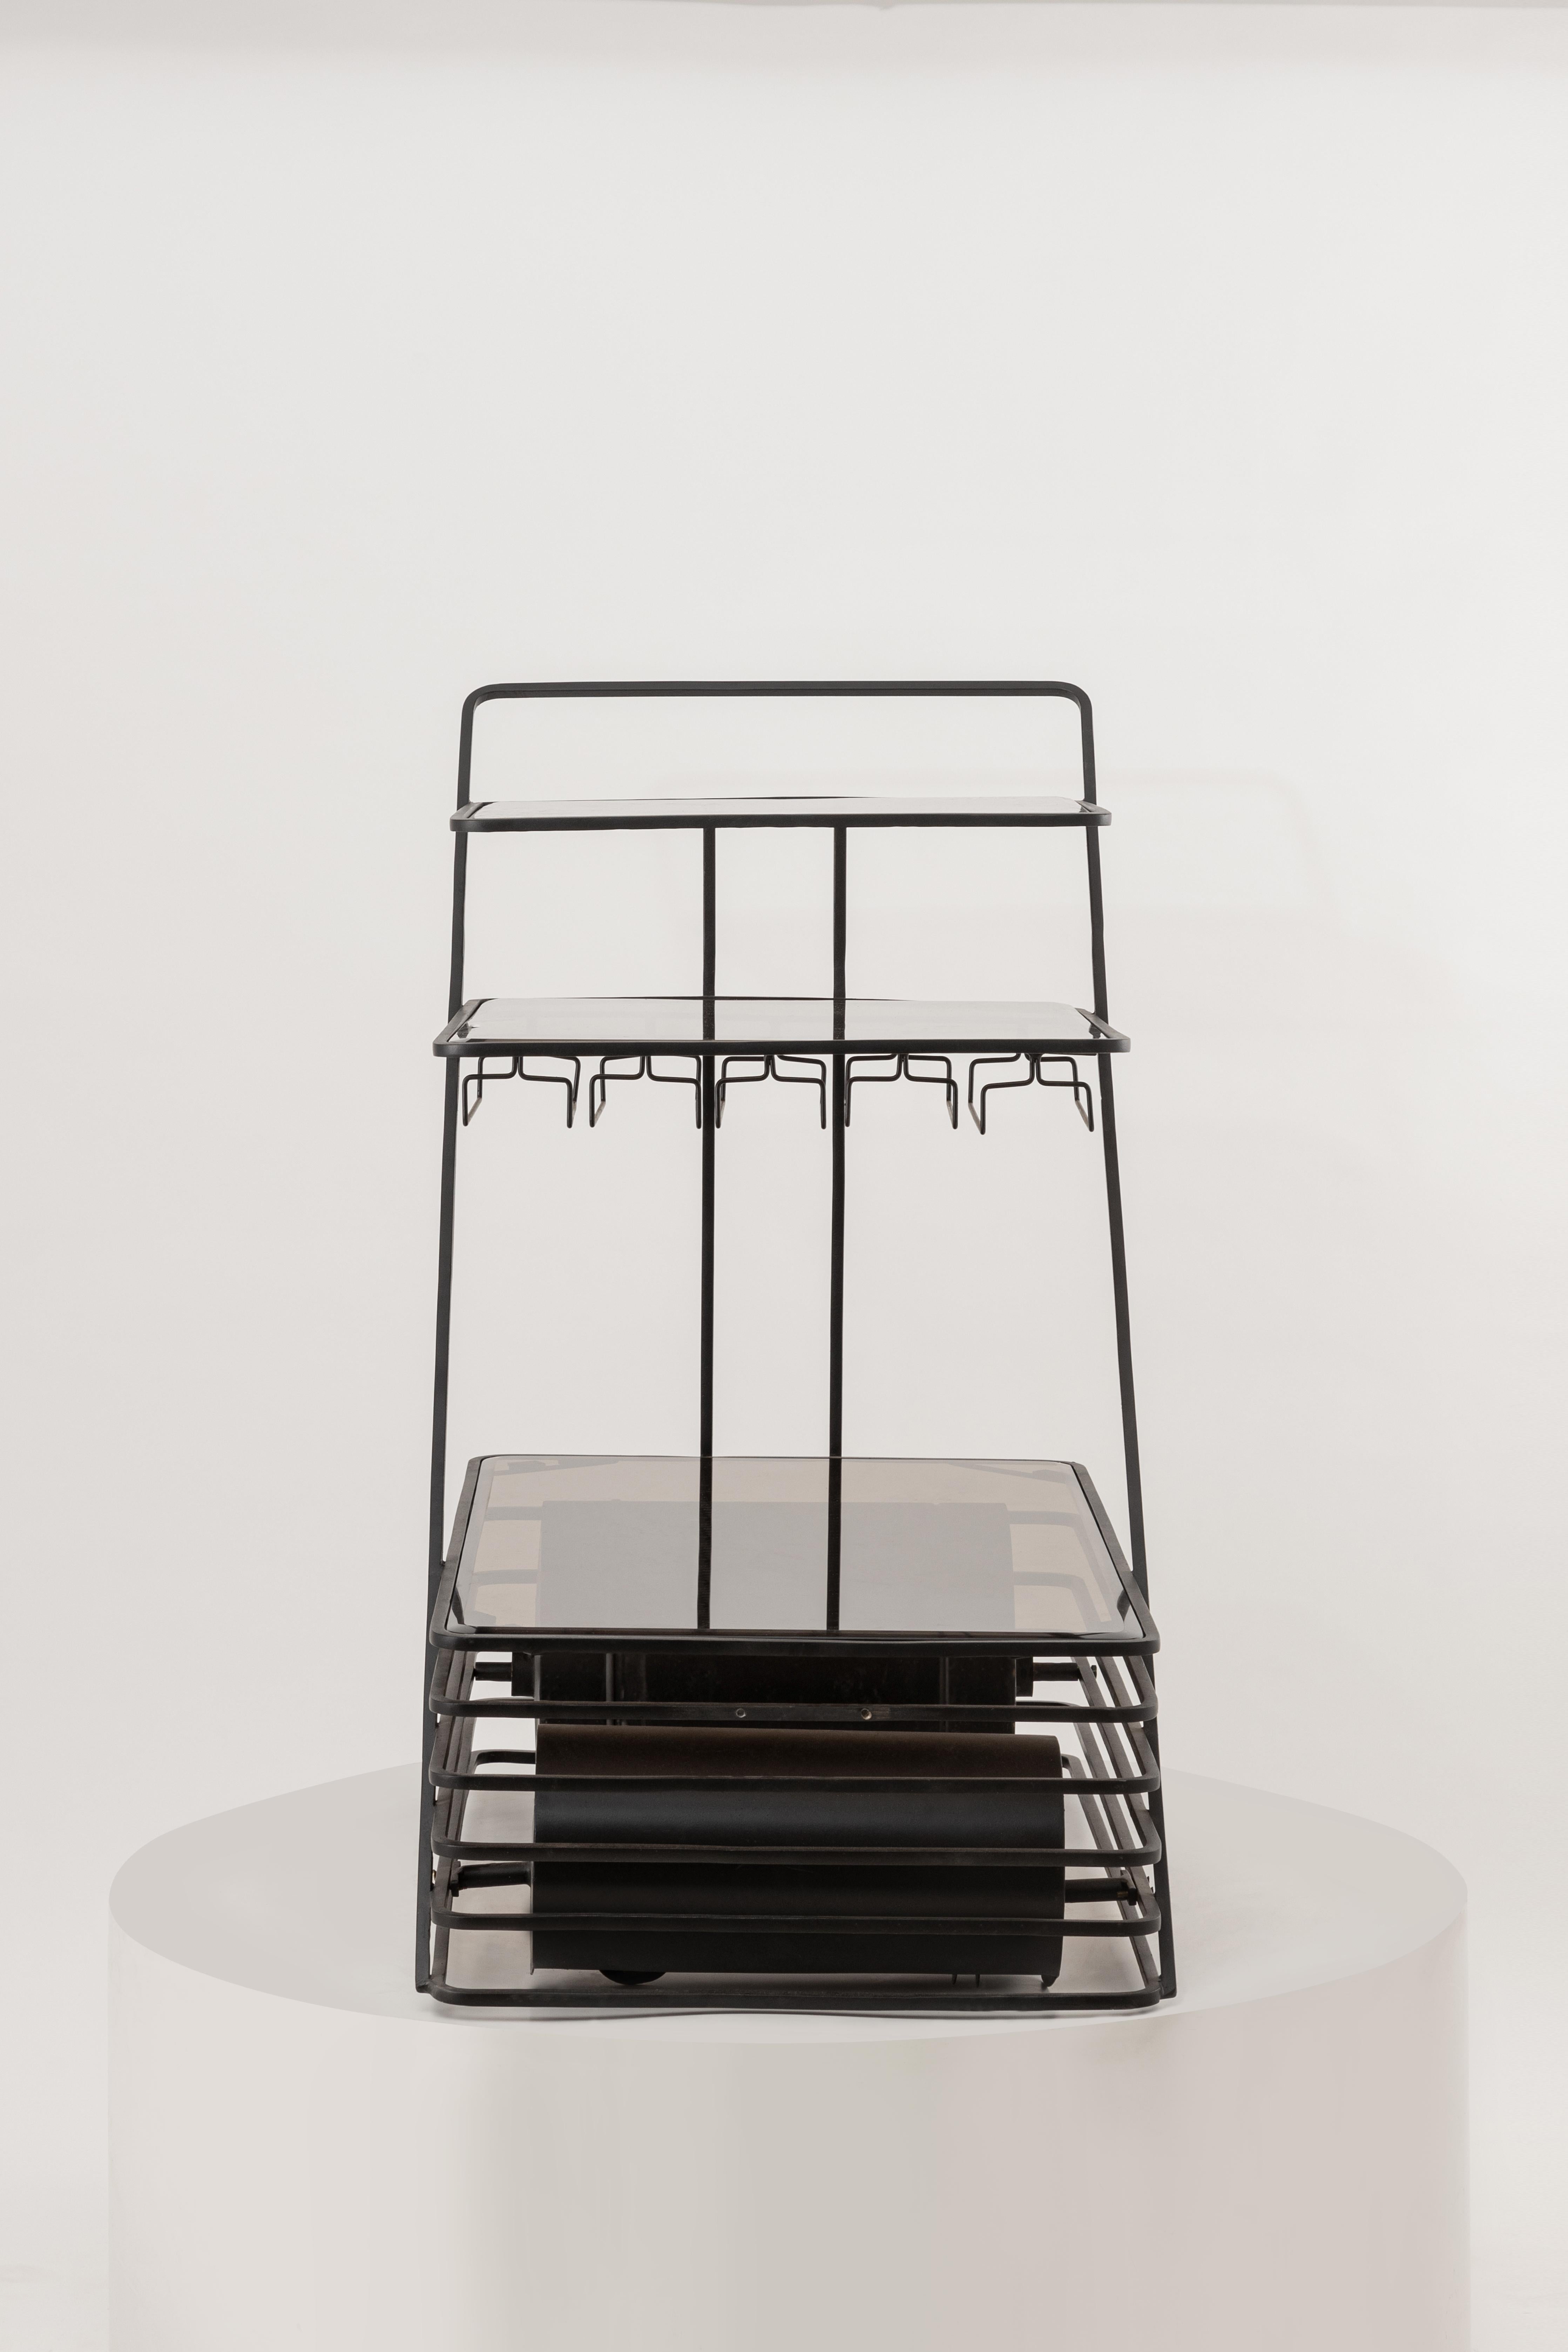 Clear the stage because the Rock ‘n’ Roll Bar Trolley is here! With its swanky wheels inspired by industrial road rollers, no one twists and turns to your beats quite like this trolley does.

A multipurpose masterpiece with three reflective glass